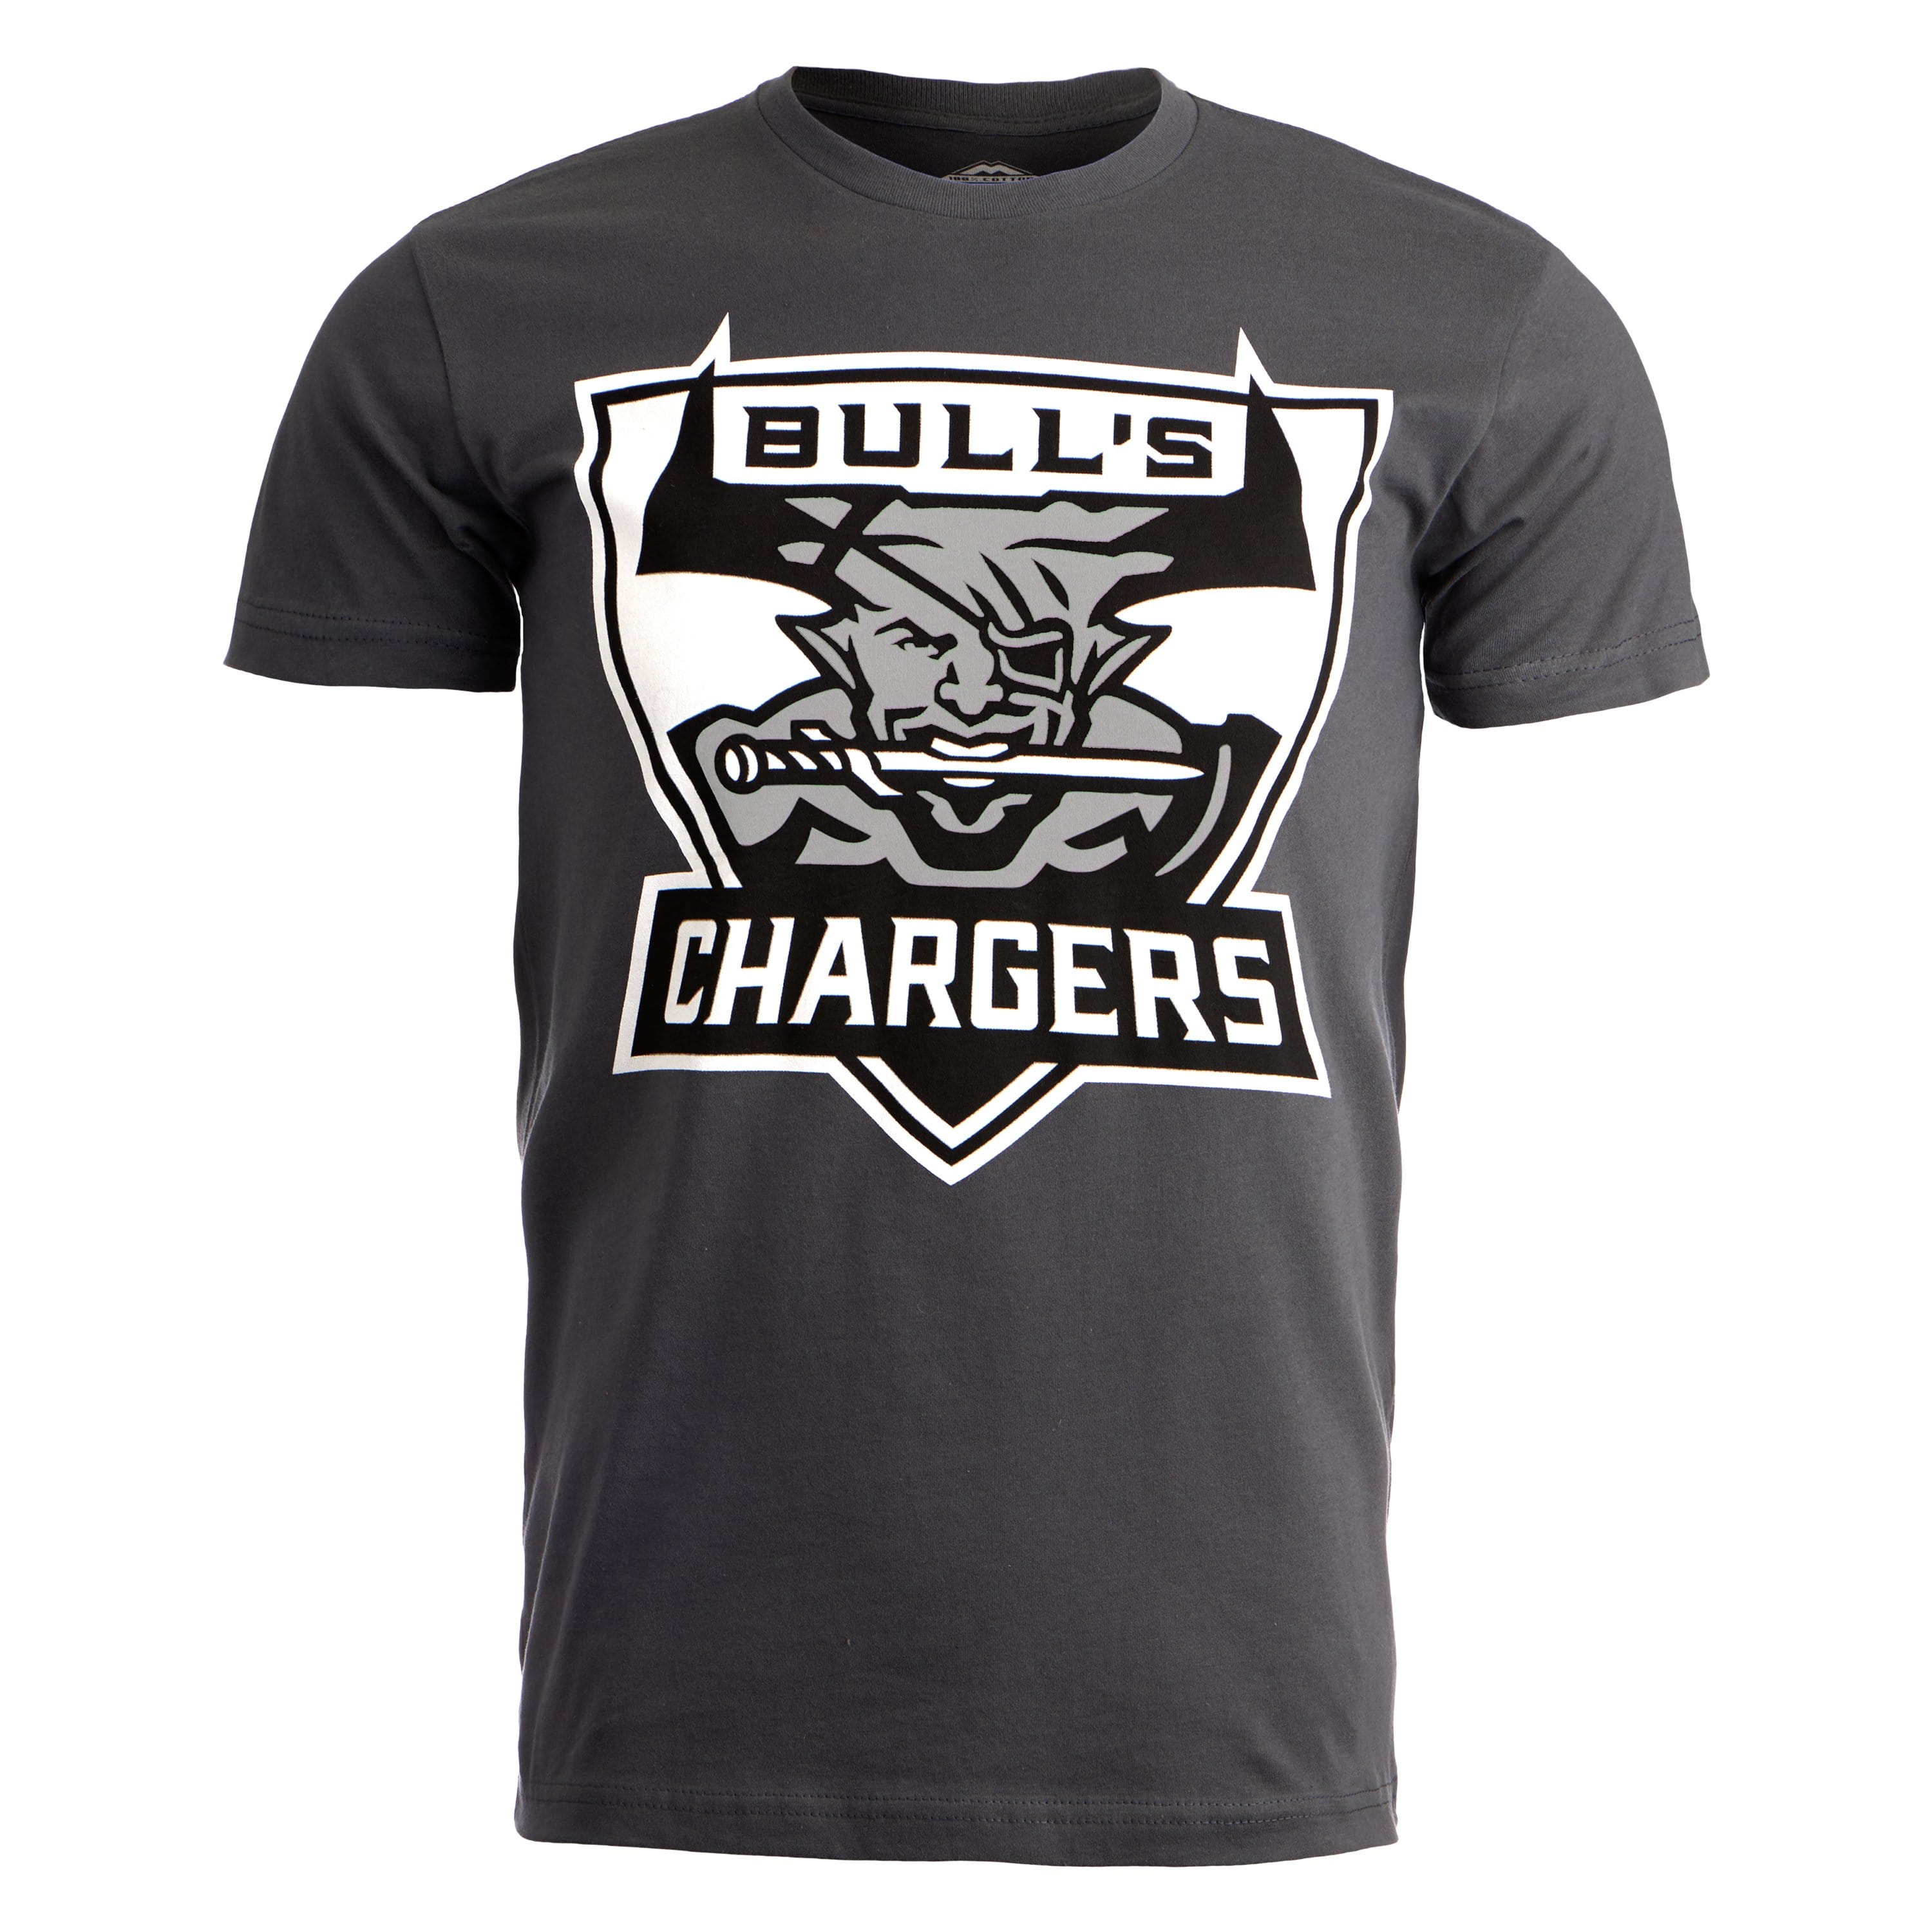 Dragon Age: Inquisition - Bull's Chargers Cotton T-shirt